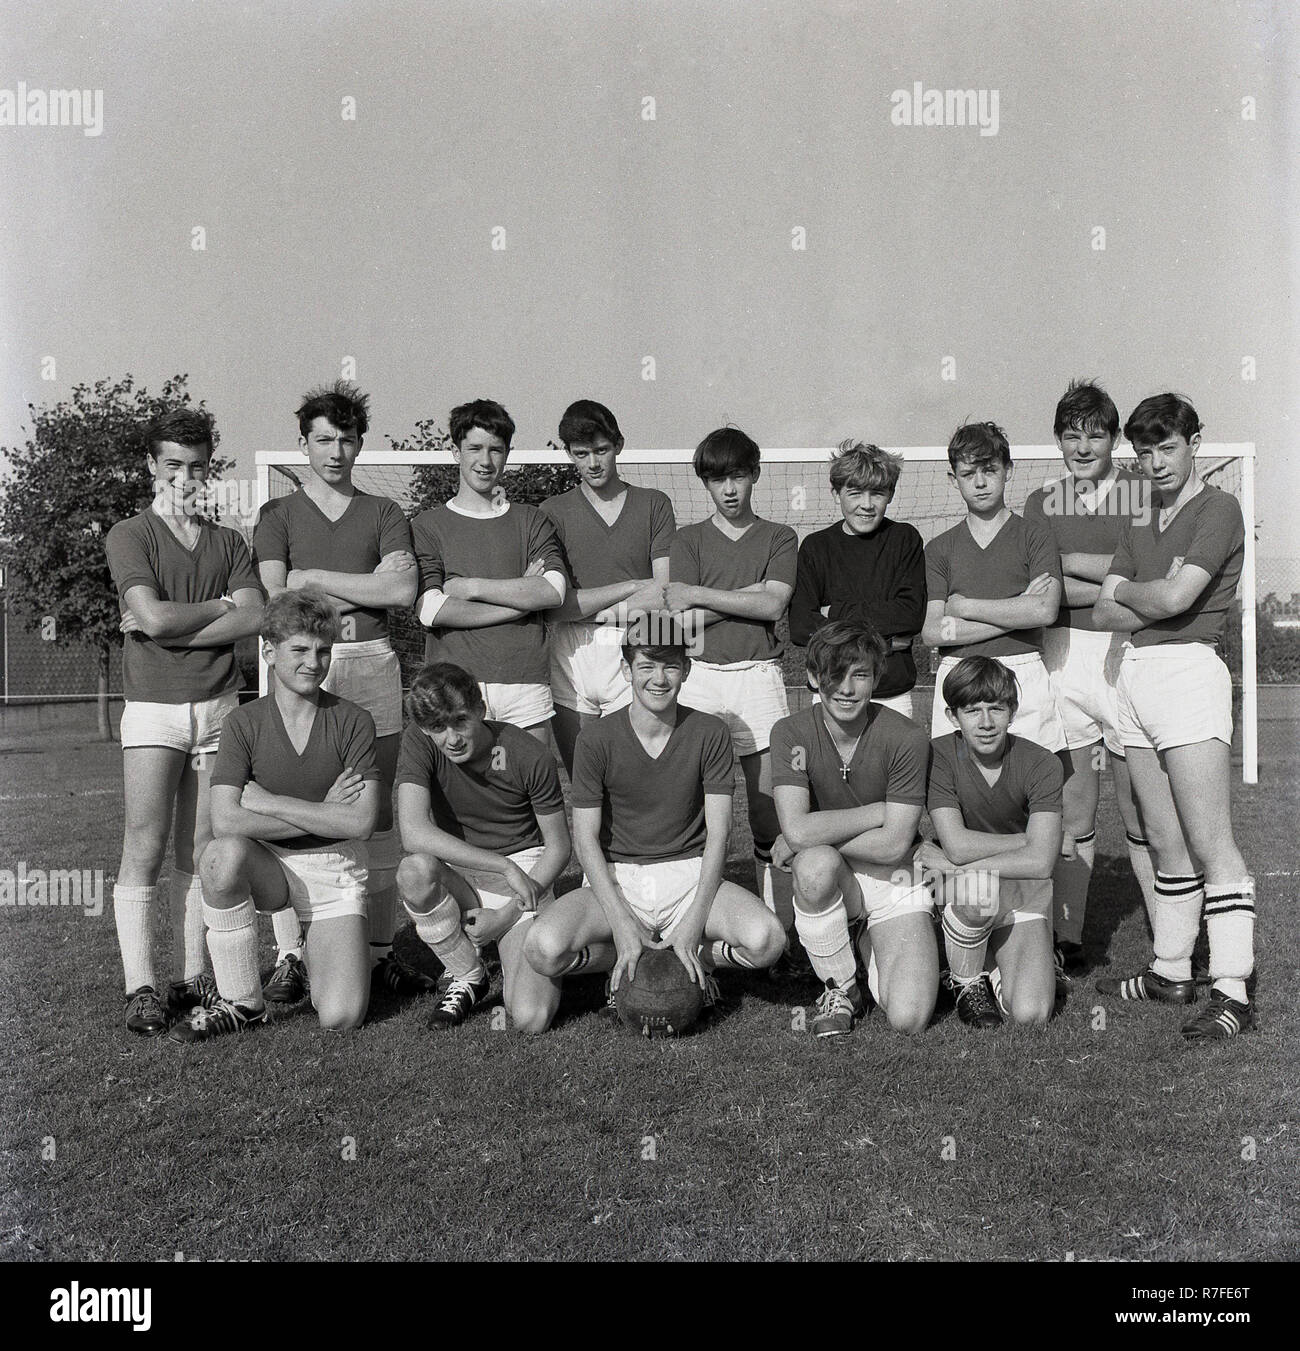 1965, young male footballers outside standing together for a team picture....v-neck shirts, polished boots, thick shin pads and look at that ball! Stock Photo